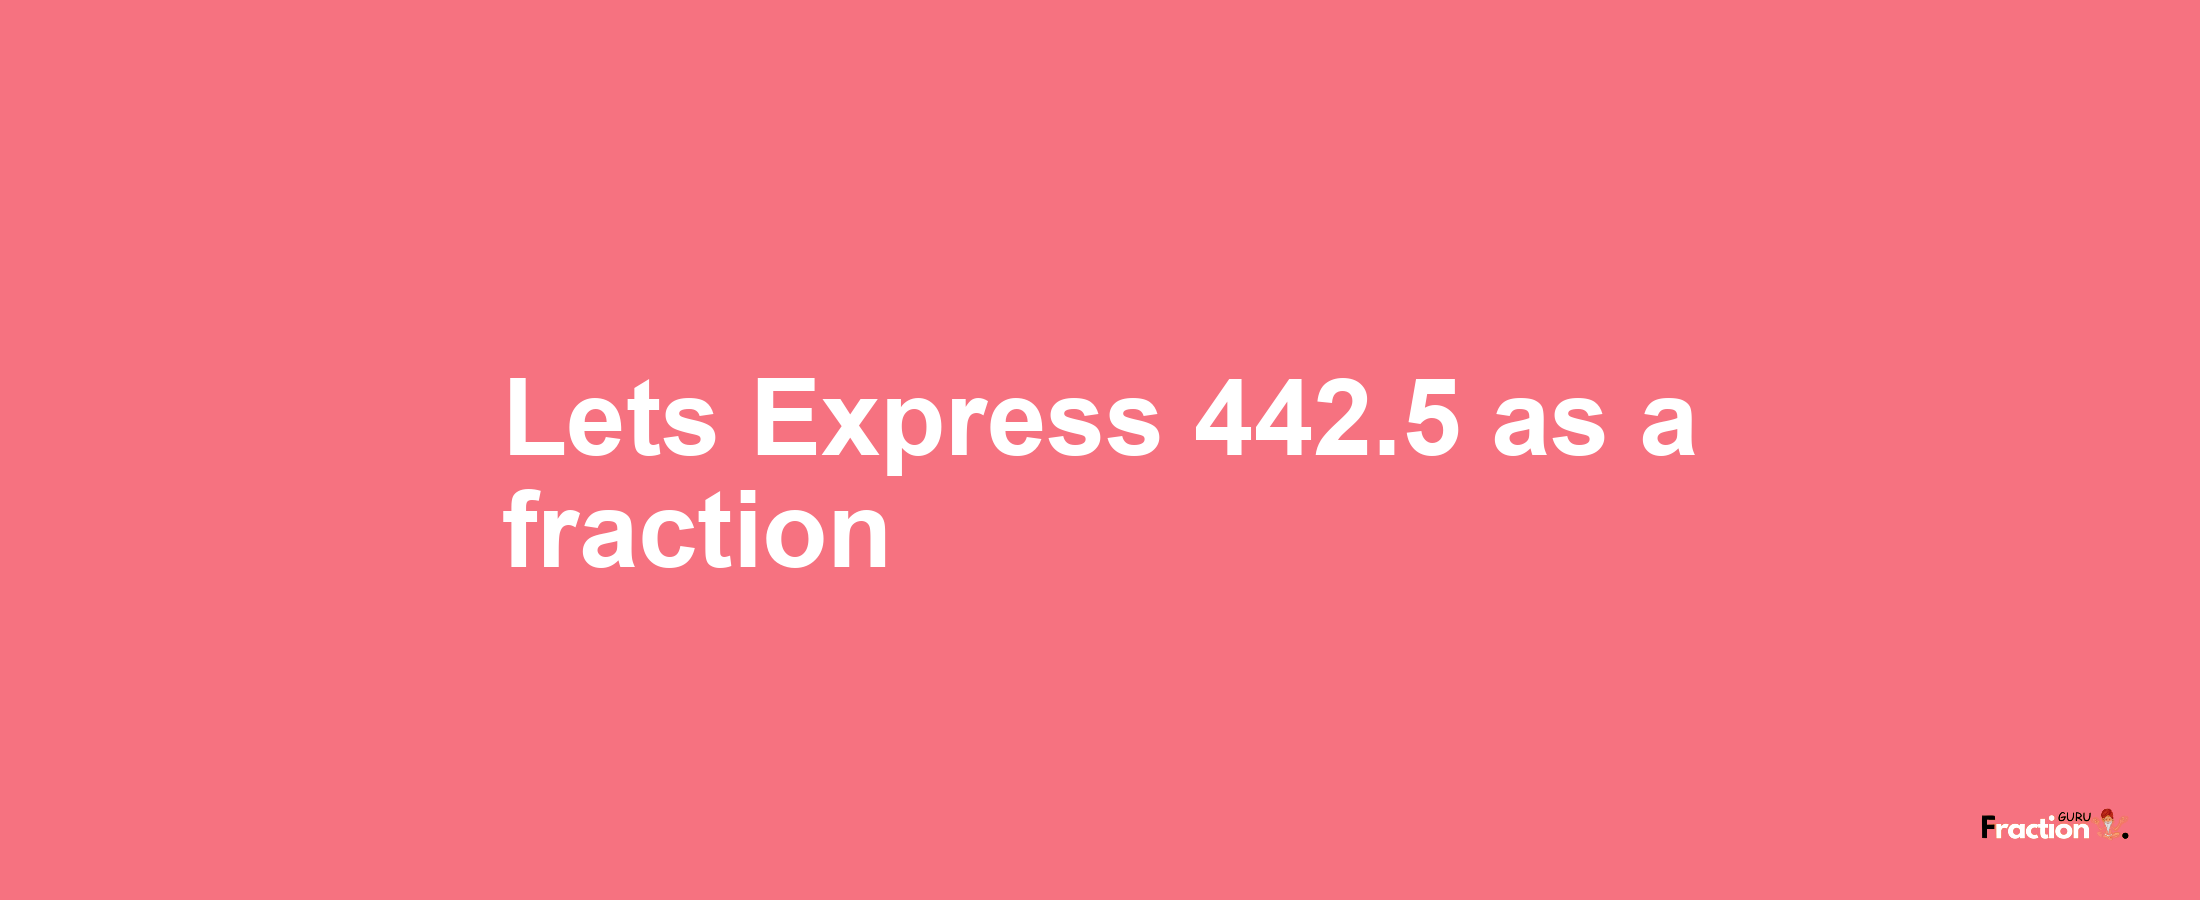 Lets Express 442.5 as afraction